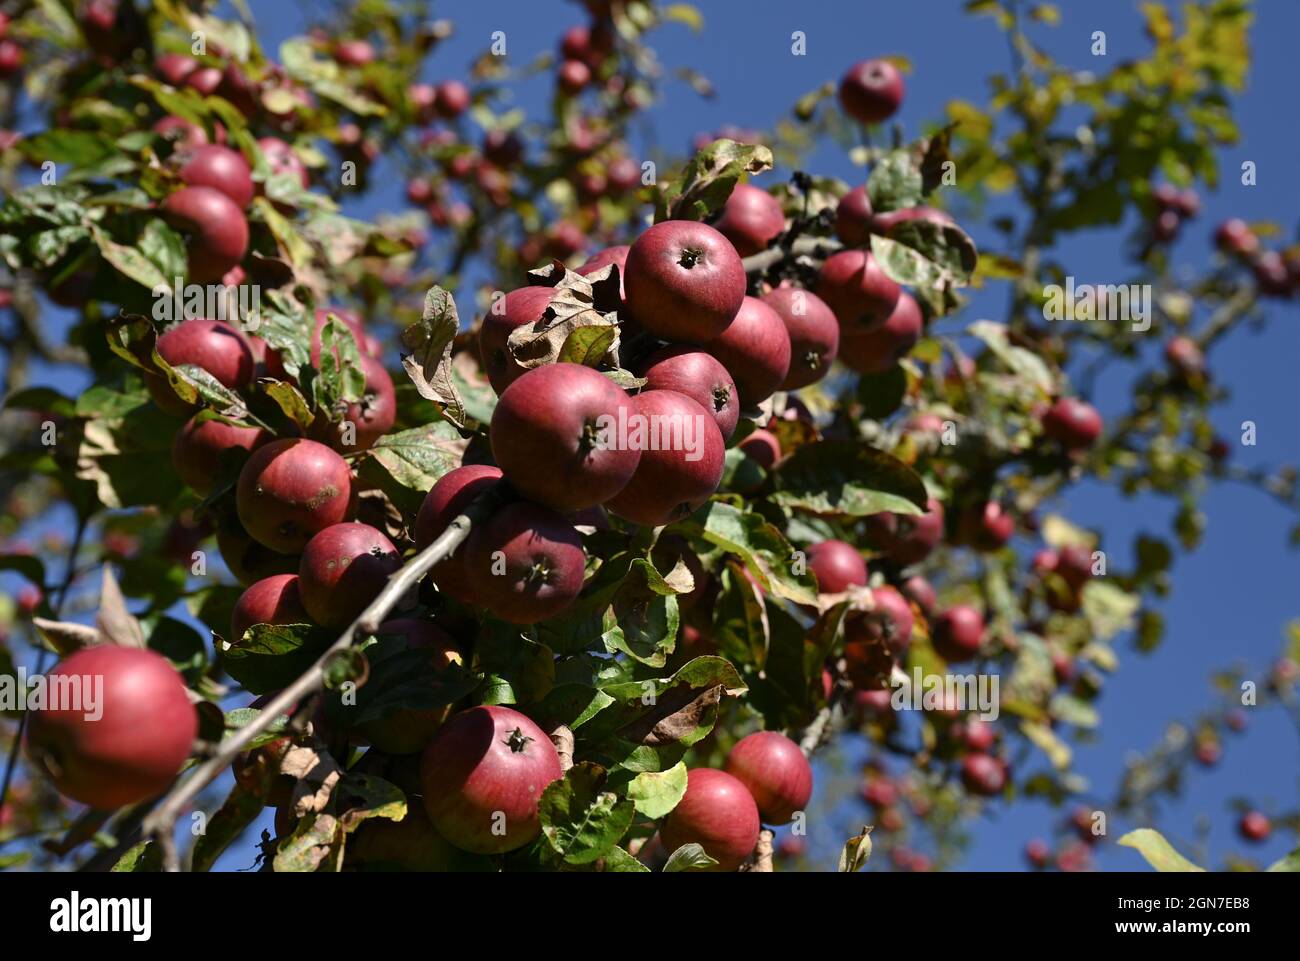 23 September 2021, Hessen, Kelkheim: Apples of the 'Dietzel's Rosenapfel' variety ripen on an apple tree in the Schmiehbachtal apple country orchard. The association of Hessian cider and fruit juice press houses has started the 2021 pressing season with a press conference. Photo: Arne Dedert/dpa Stock Photo